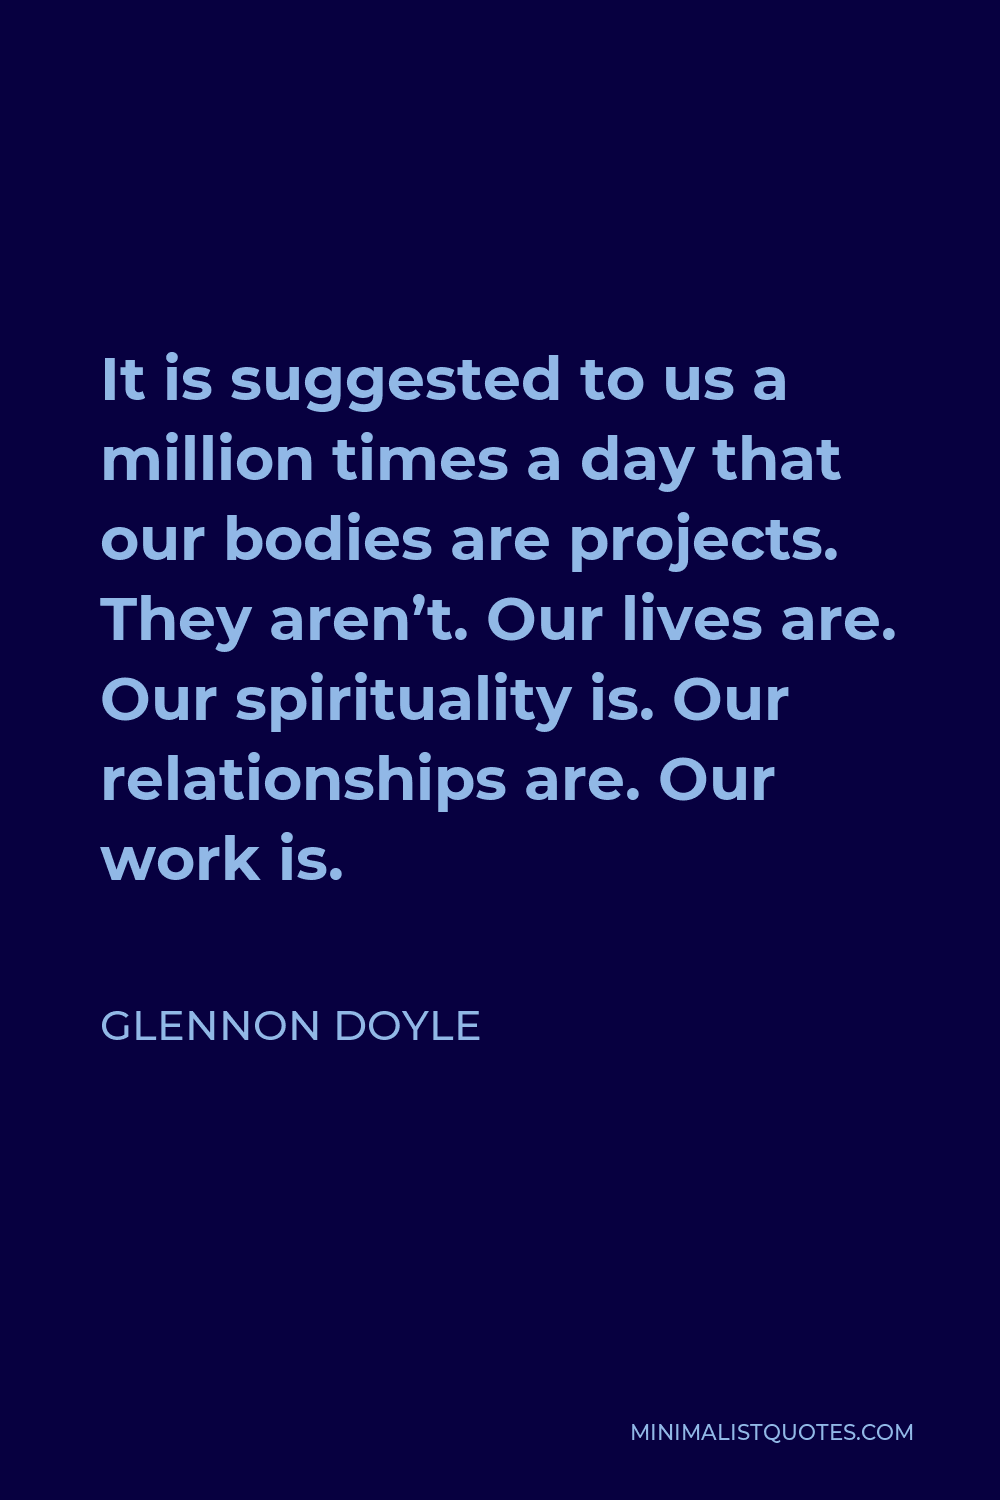 Glennon Doyle Quote - It is suggested to us a million times a day that our bodies are projects. They aren’t. Our lives are. Our spirituality is. Our relationships are. Our work is.